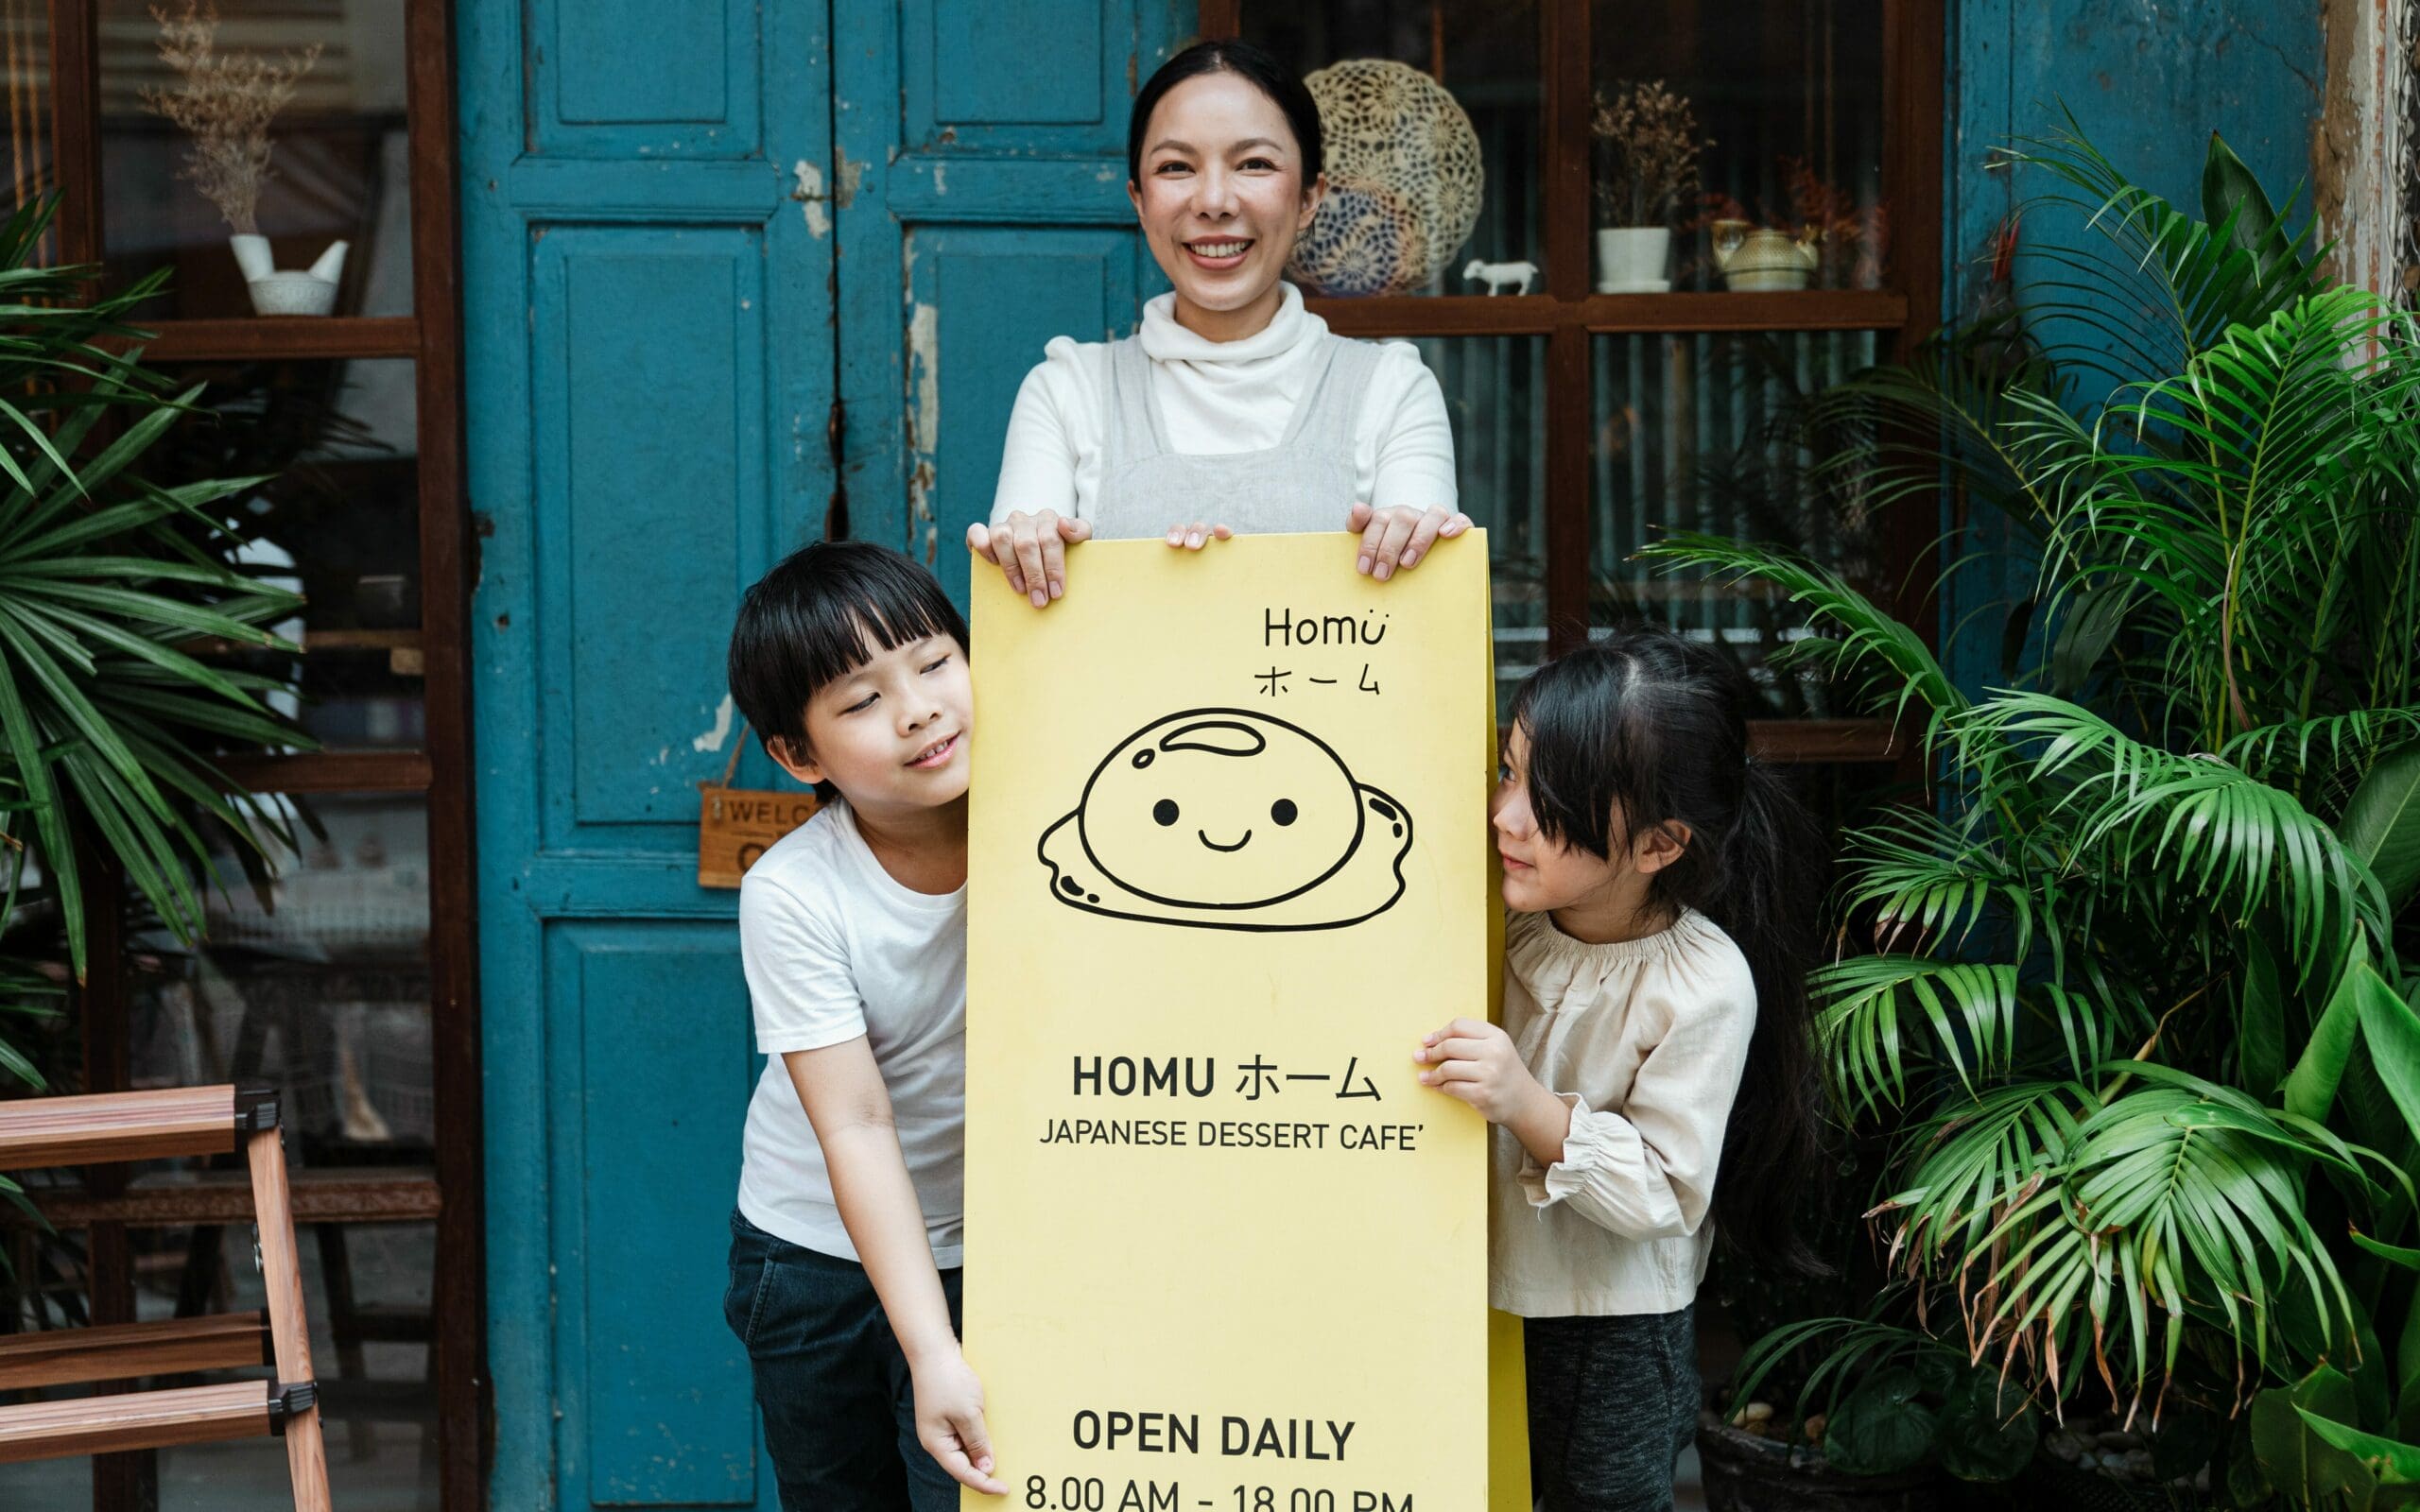 A woman and two children holding up a yellow sign promoting small business automation.